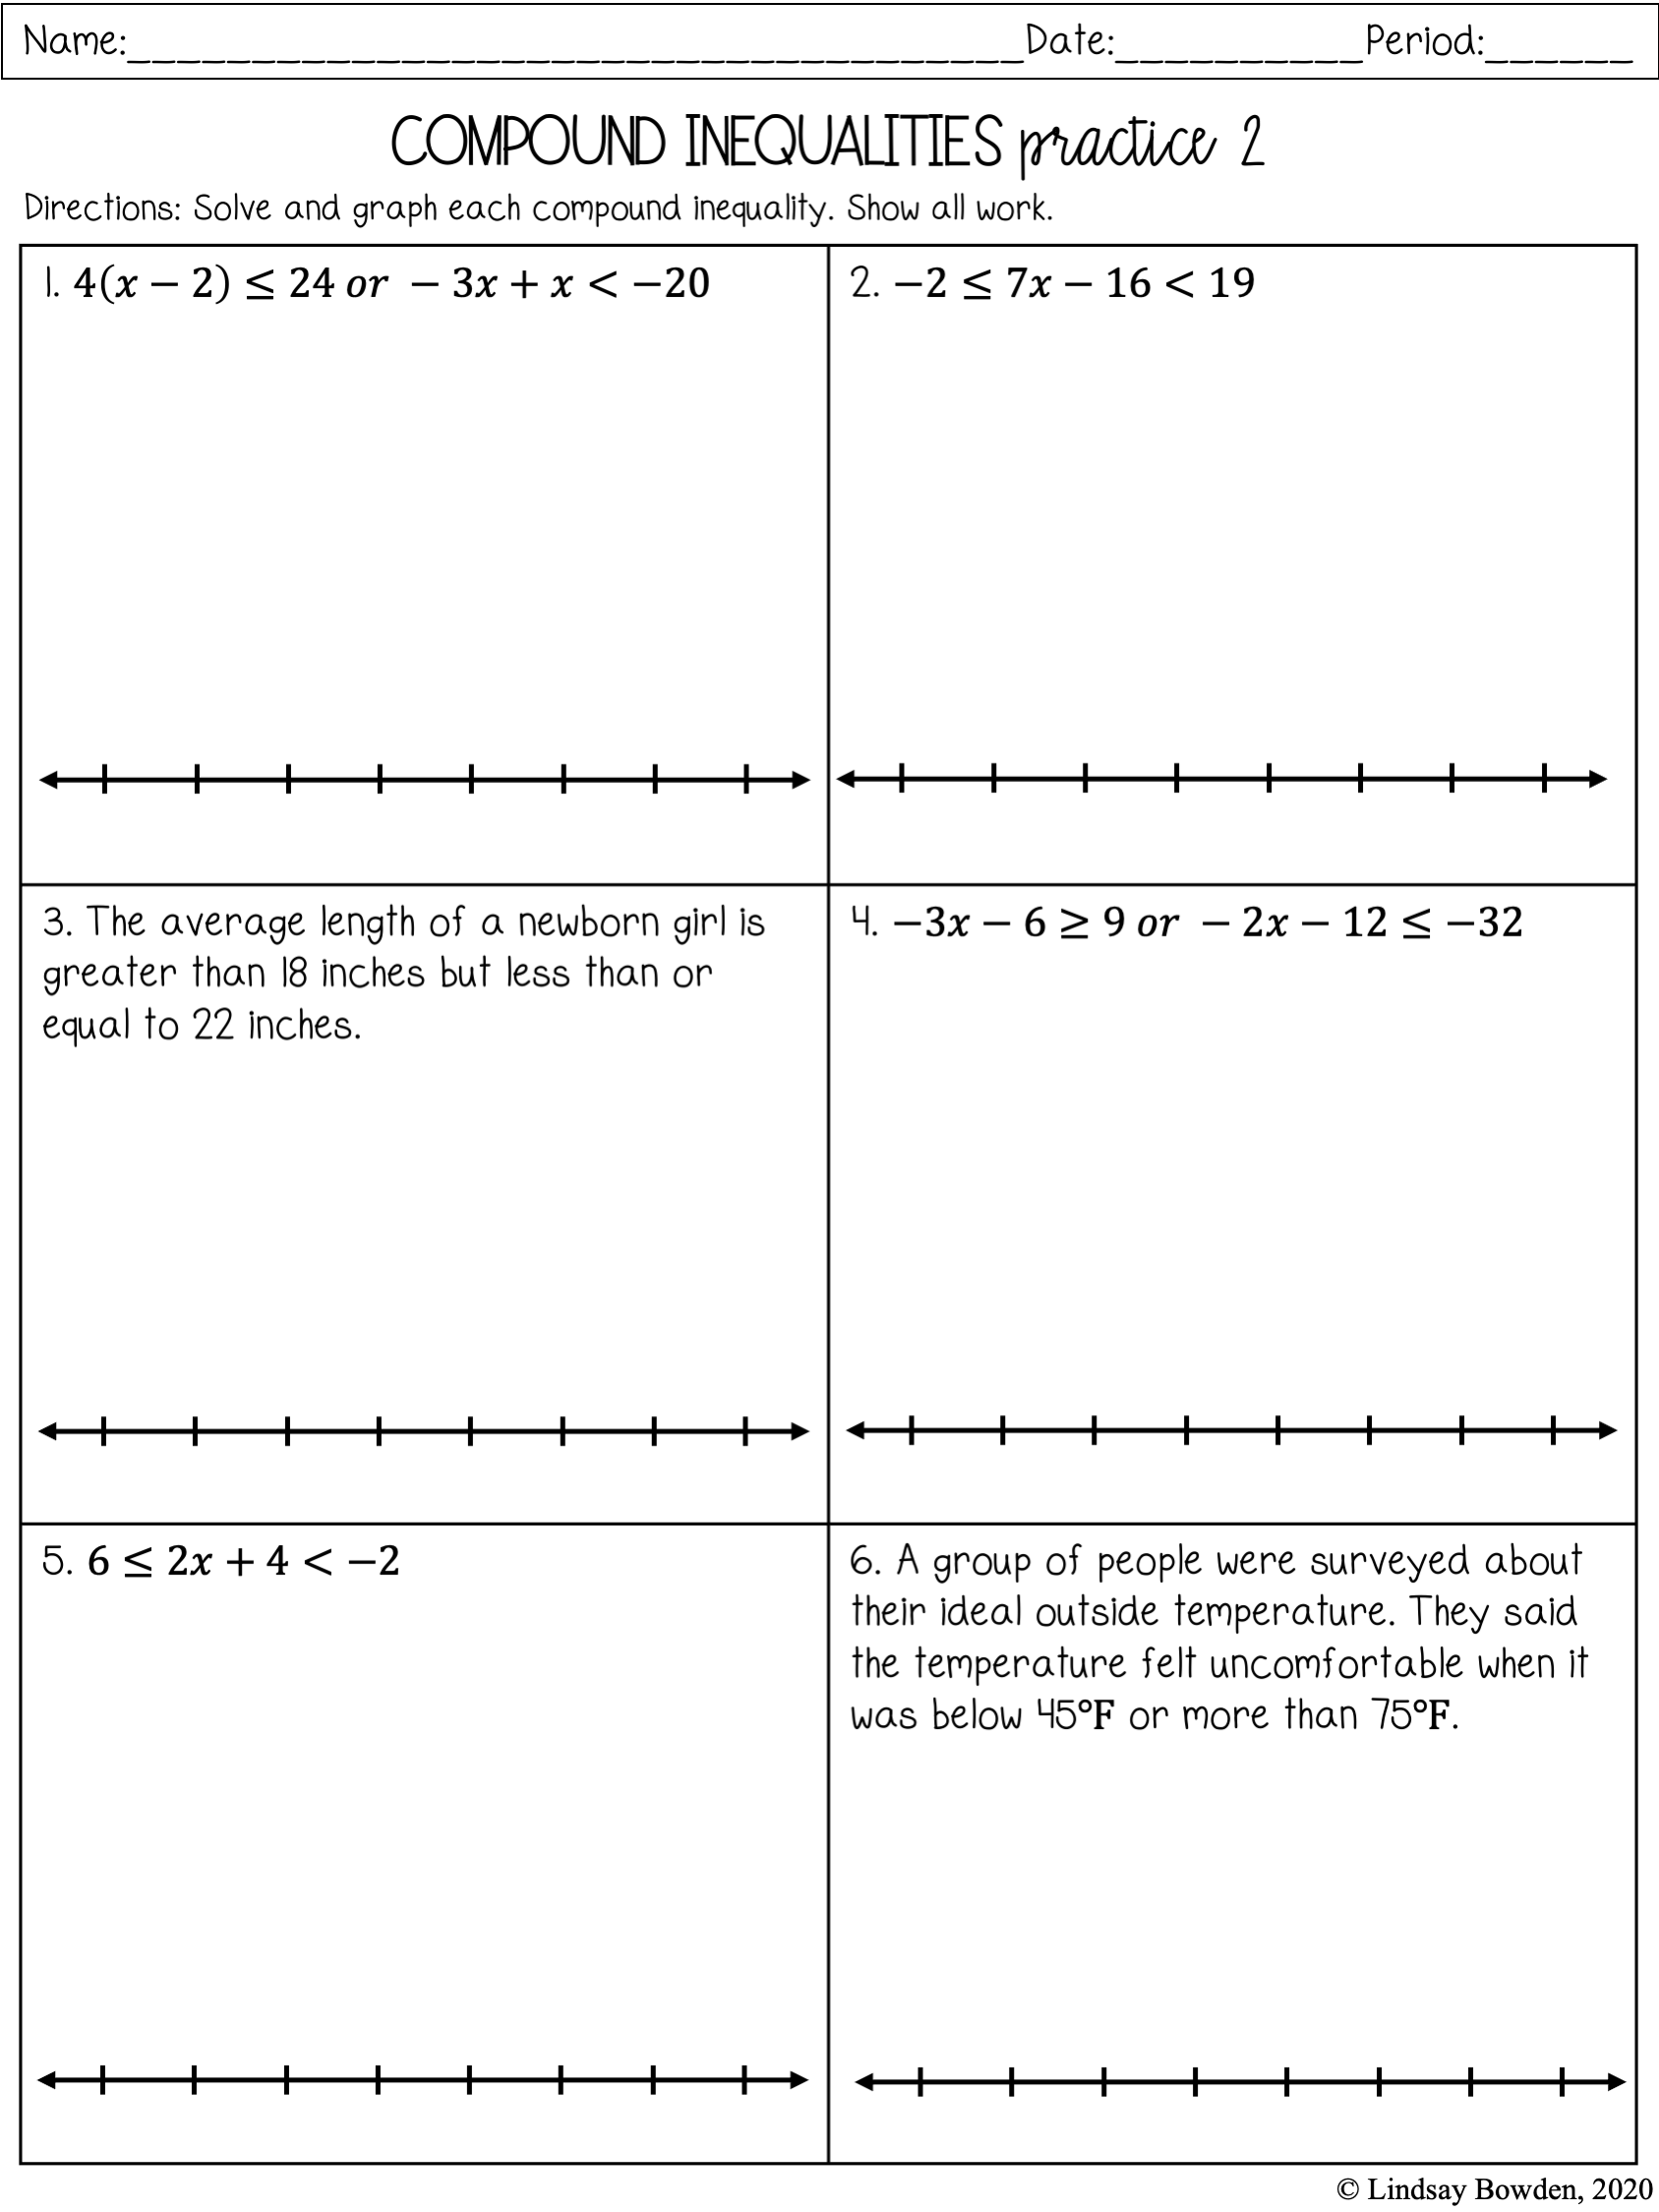 Compound Inequalities Notes and Worksheets - Lindsay Bowden Regarding Solving Compound Inequalities Worksheet